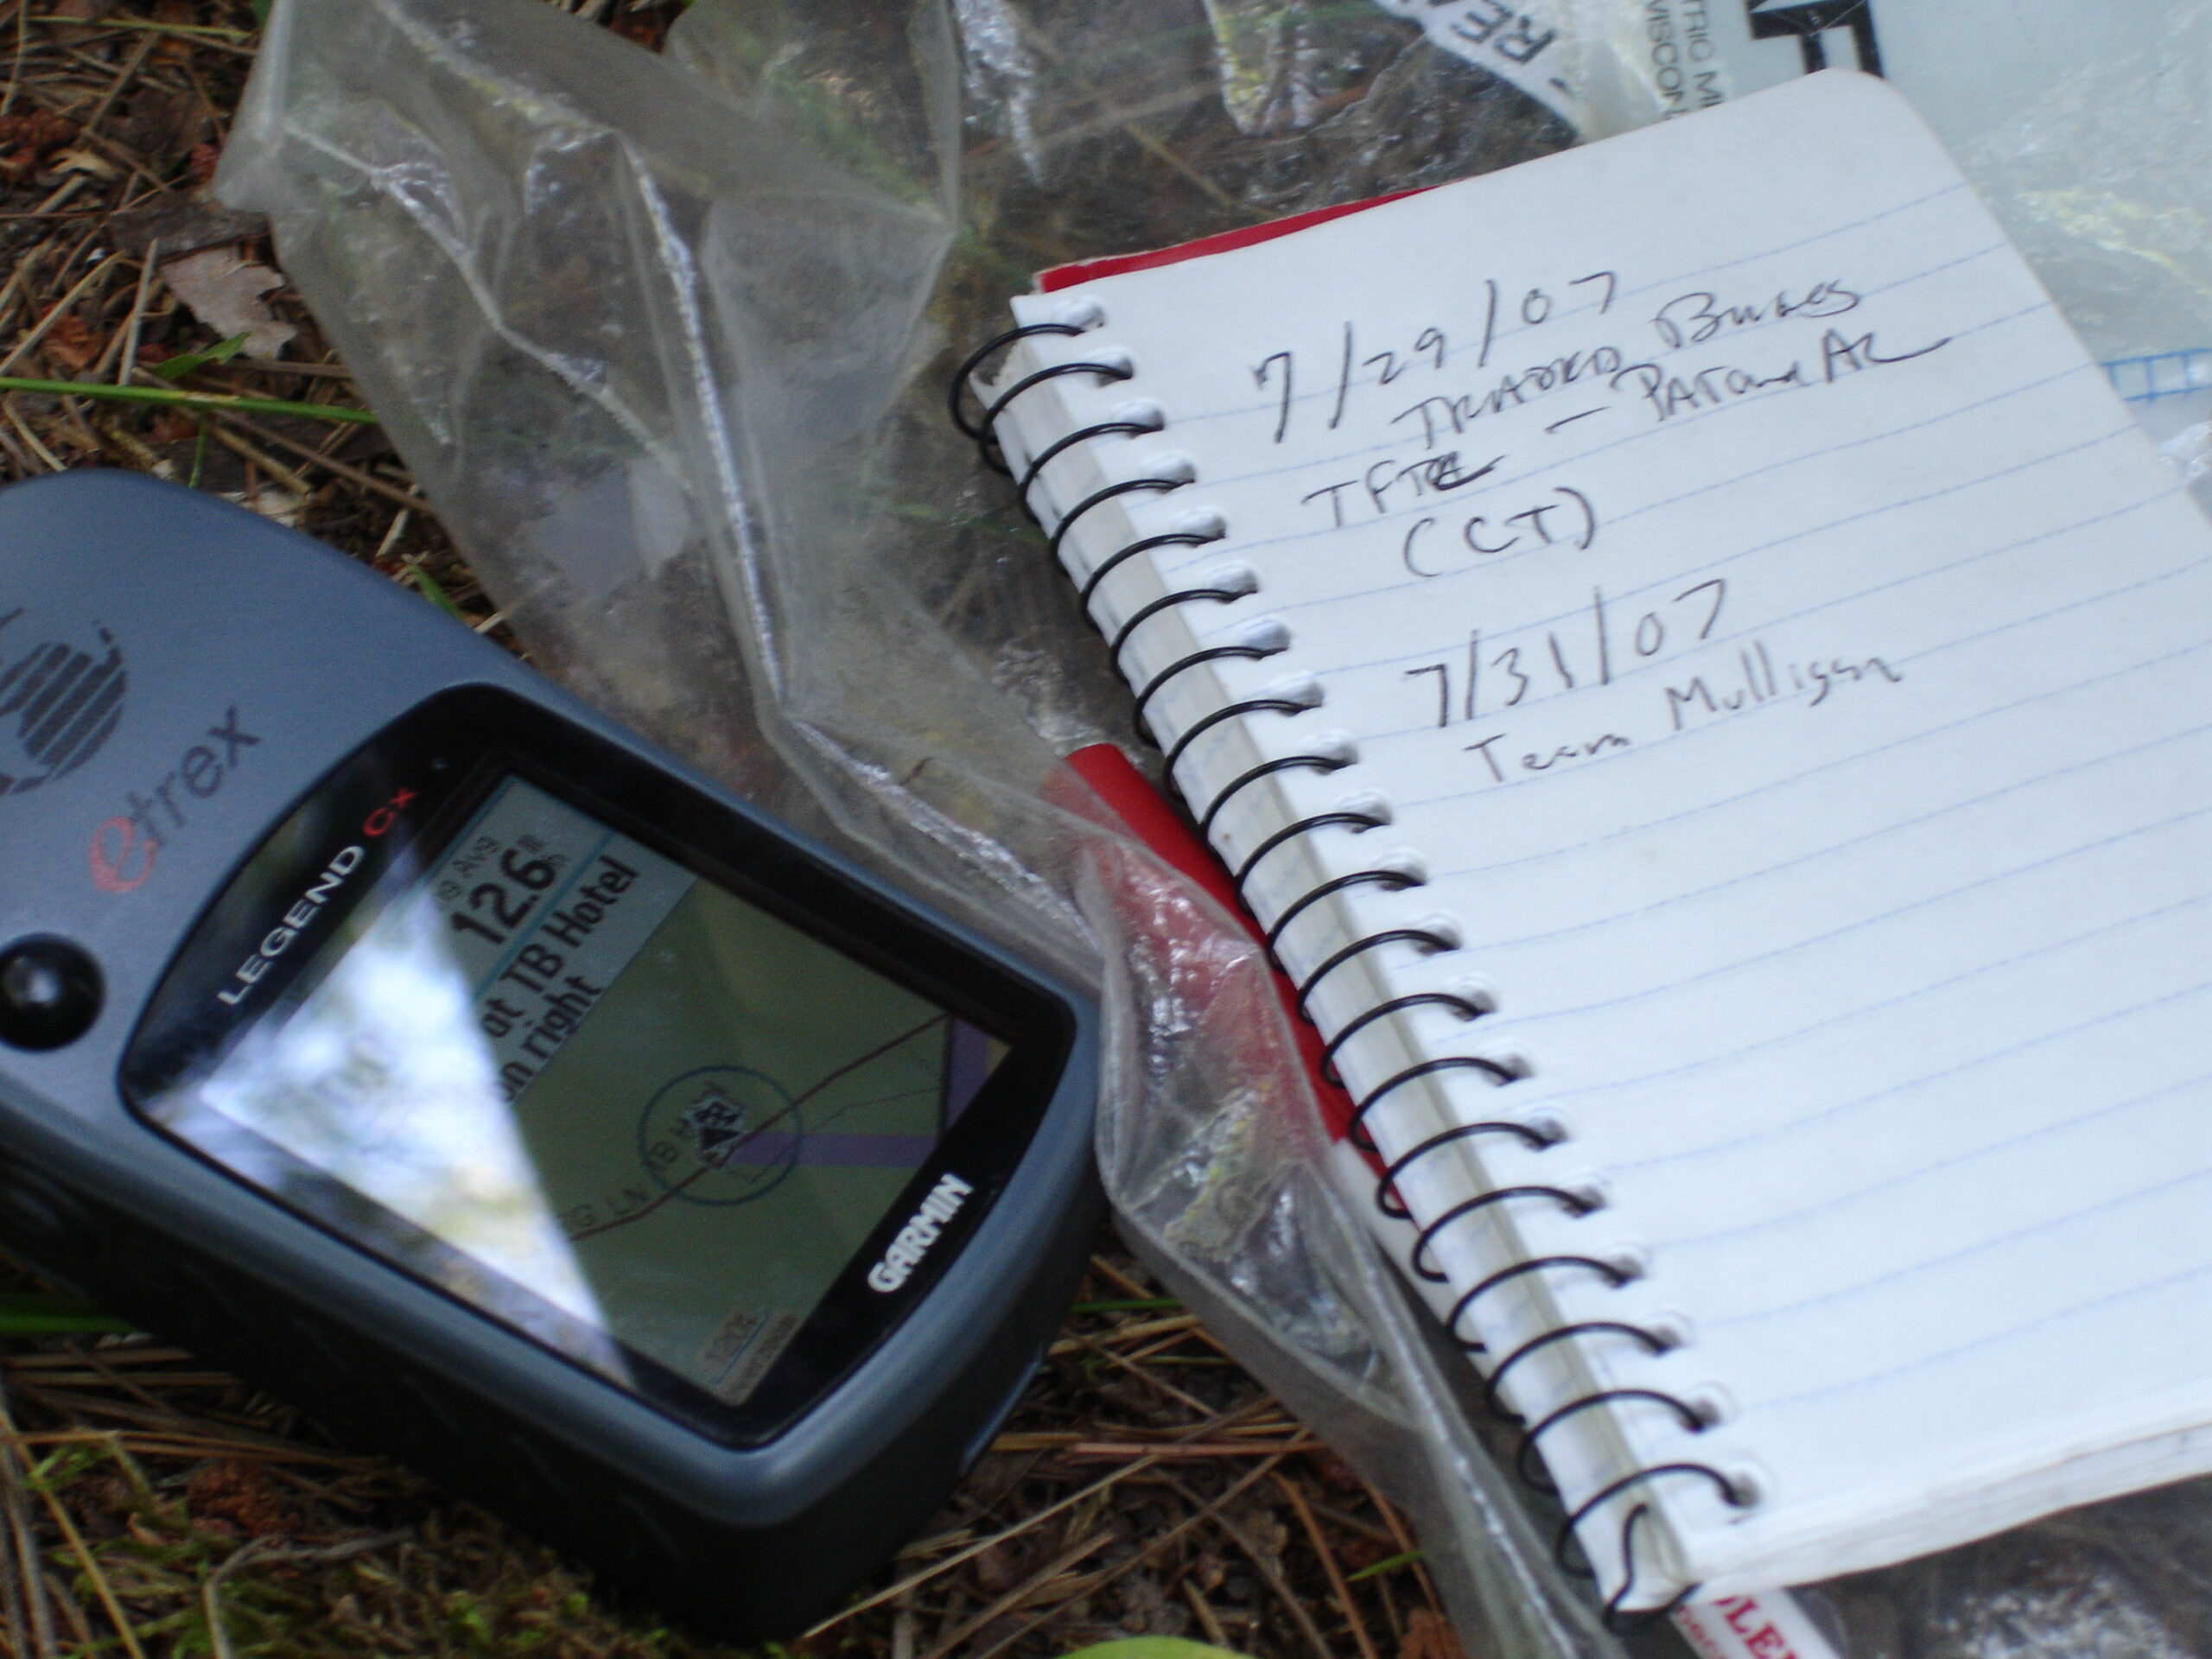 A gps sits on the grass next to the small notebook used as a log in a Wisconsin geocache.